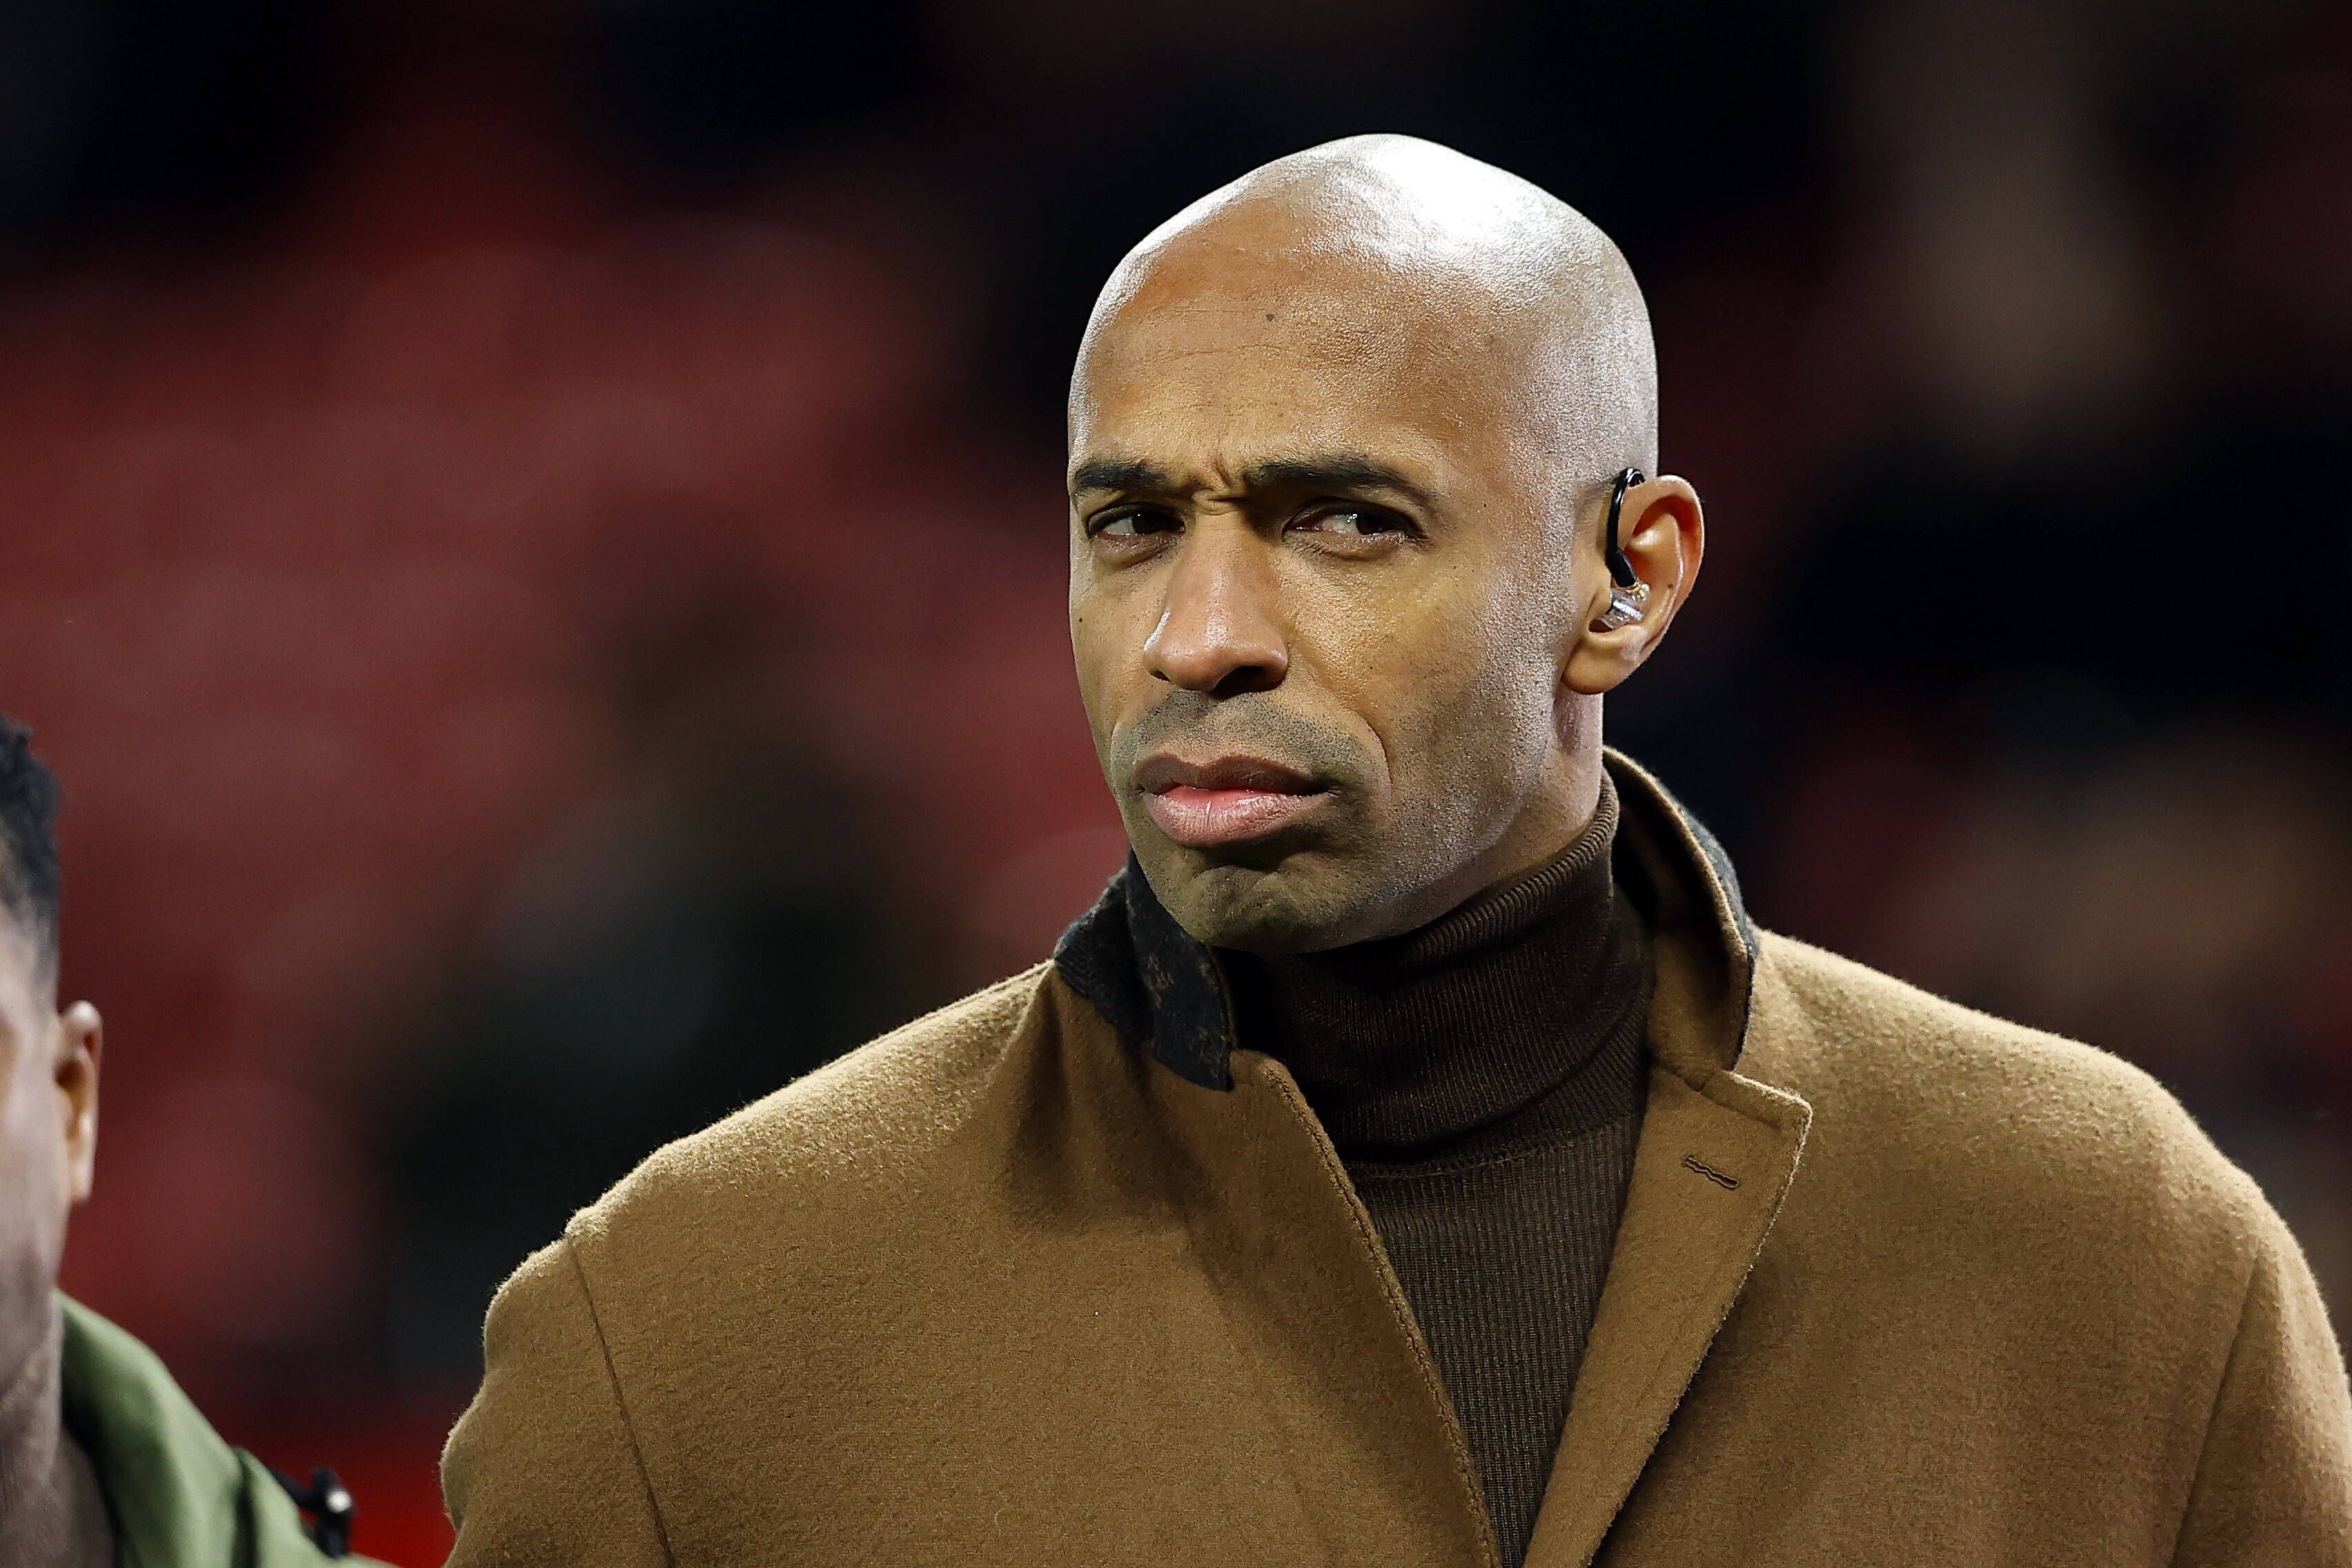 Thierry Henry is one of the famous footballers who have lost huge sums of money after a divorce.